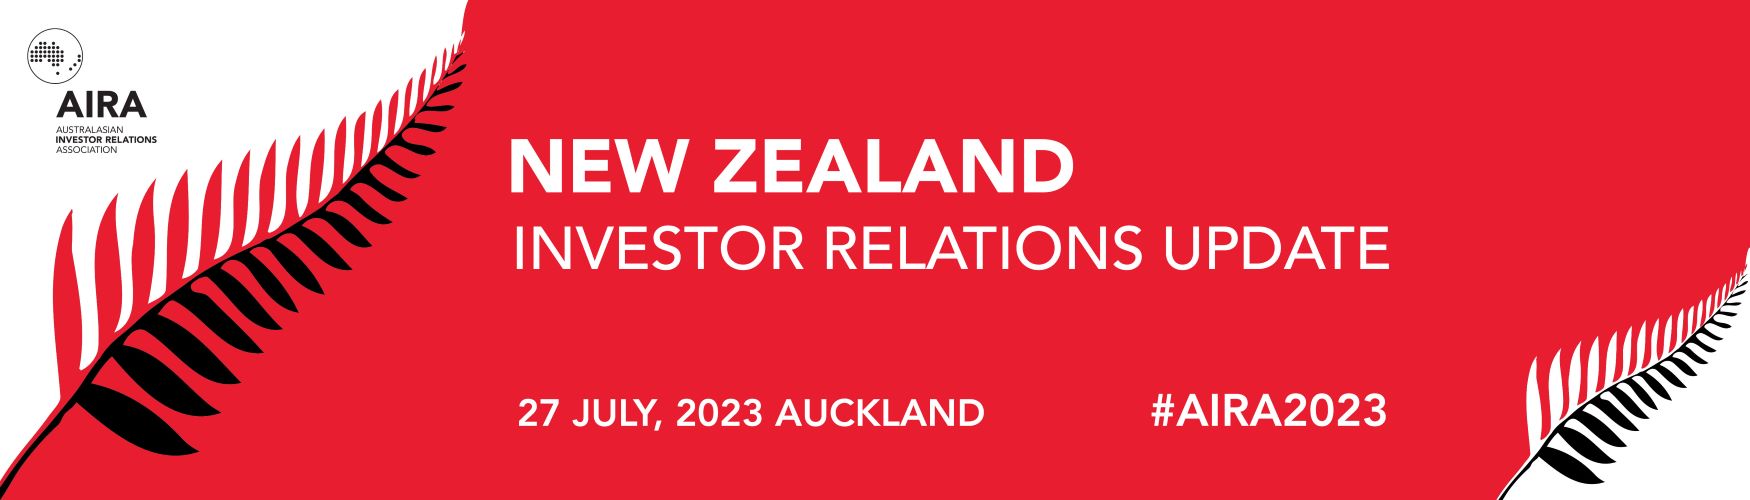 2023 Annual New Zealand Investor Relations Update